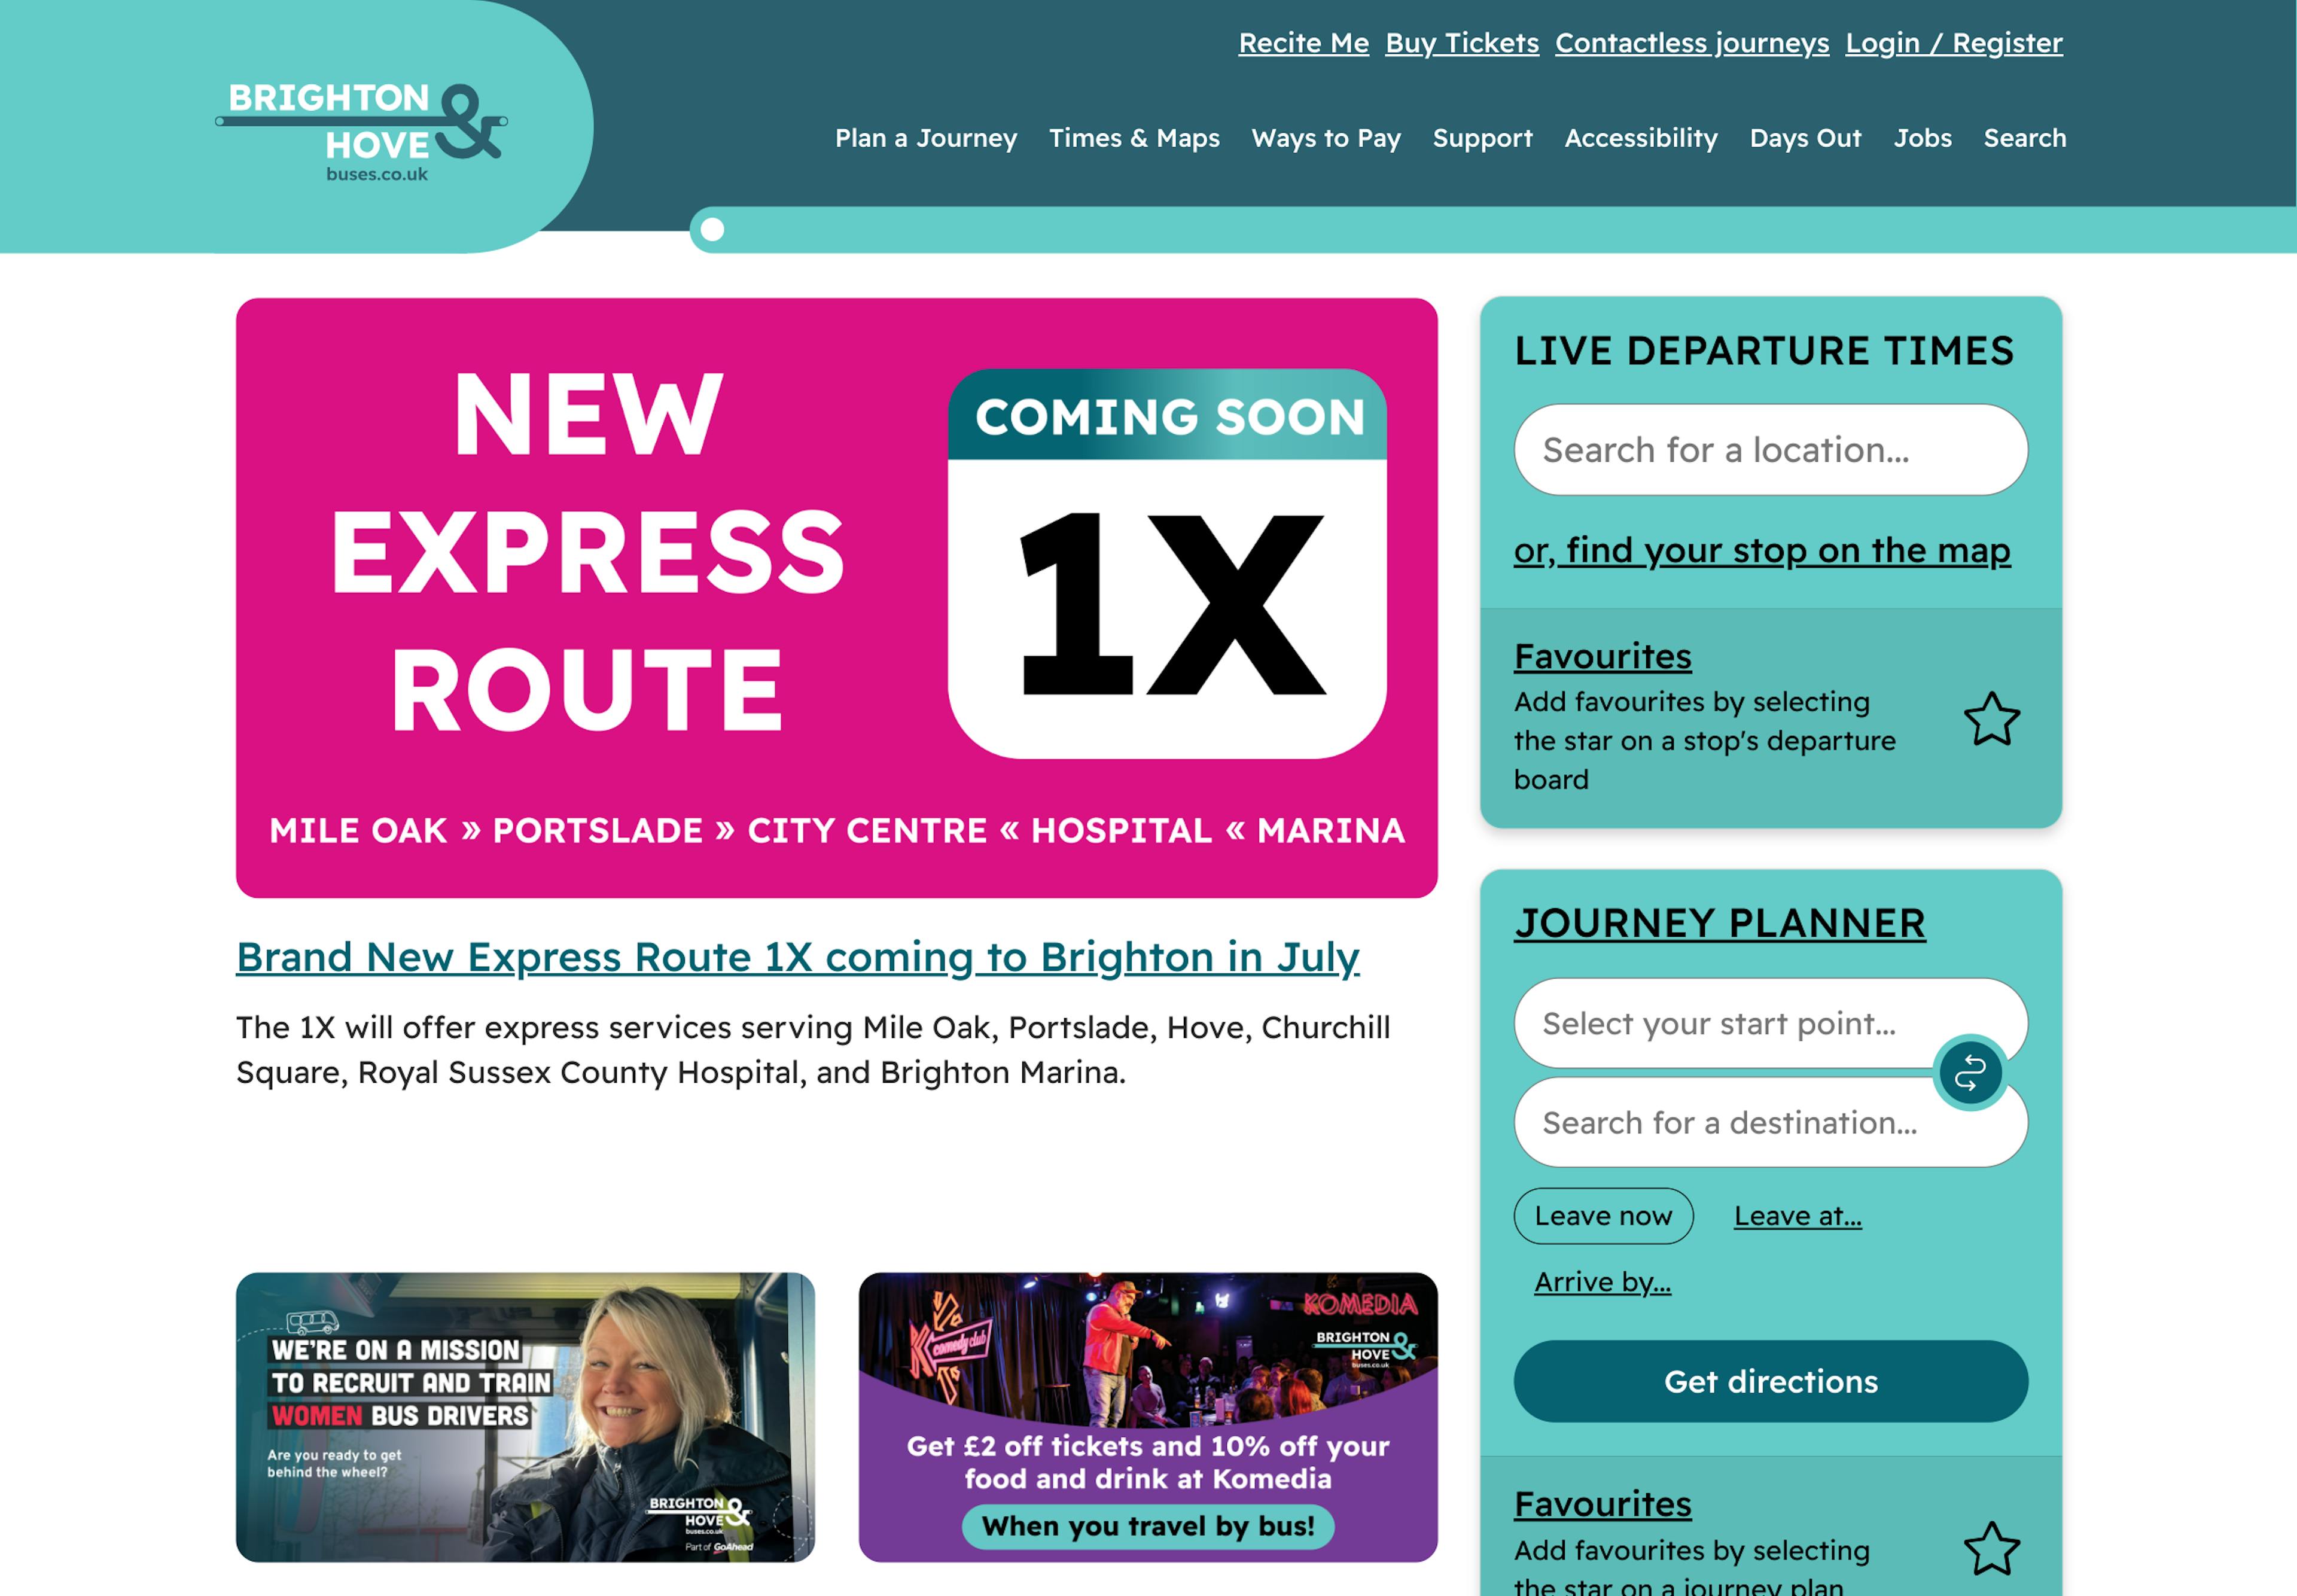 A screenshot of the Brighton & Hove Buses homepage